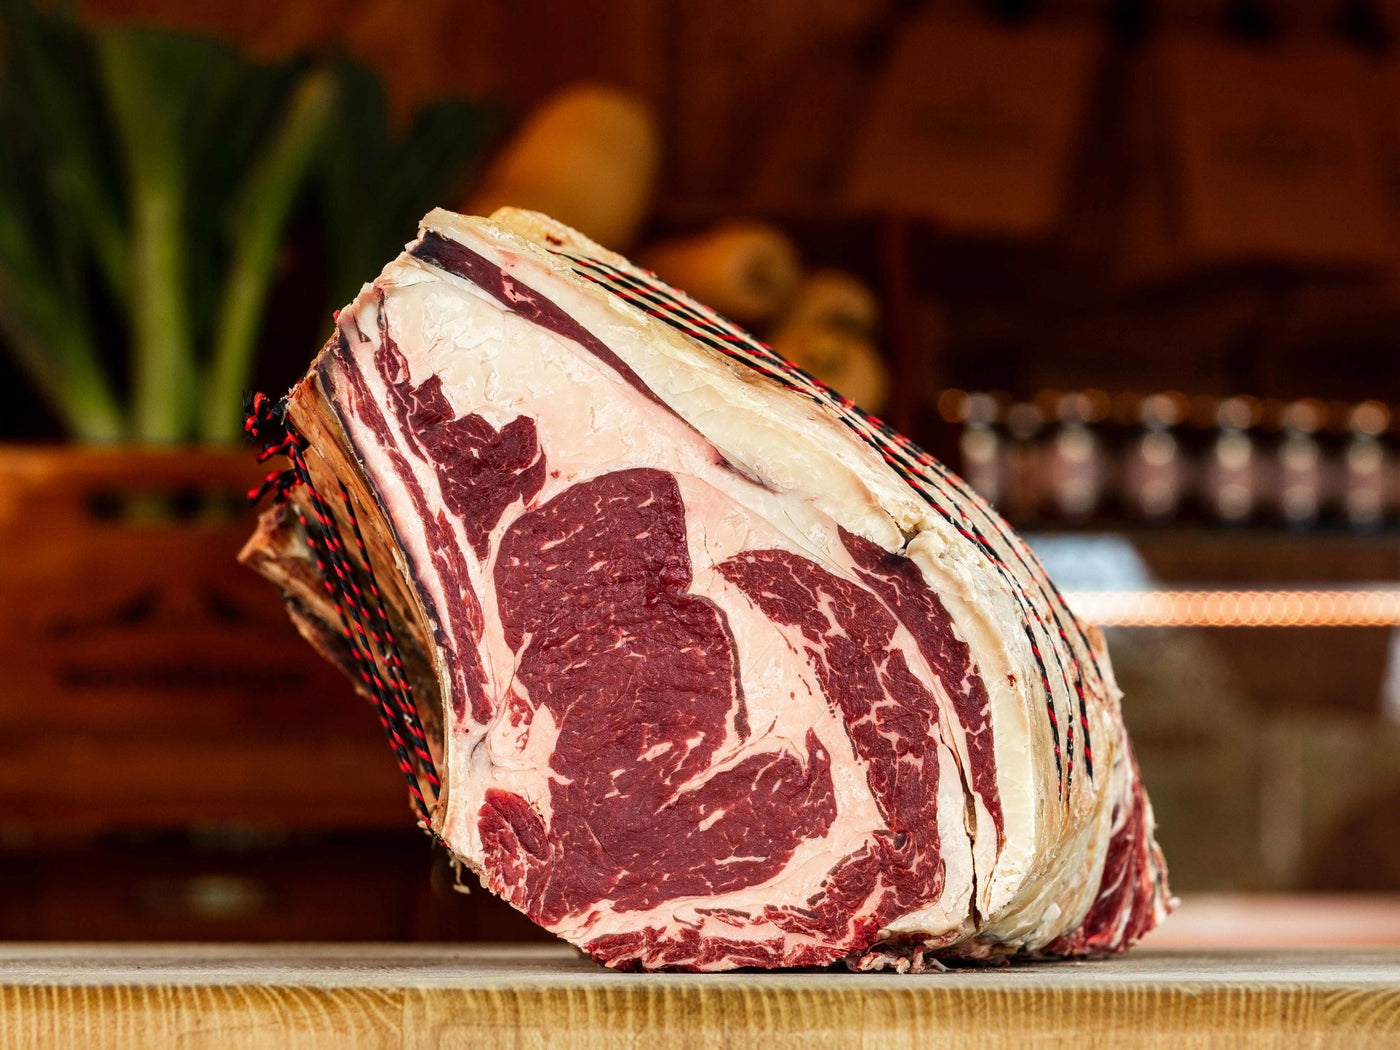 Grass Fed, Dry-Aged Rib Of Beef - Ex Dairy - Beef - Thomas Joseph Butchery - Ethical Dry-Aged Meat The Best Steak UK Thomas Joseph Butchery